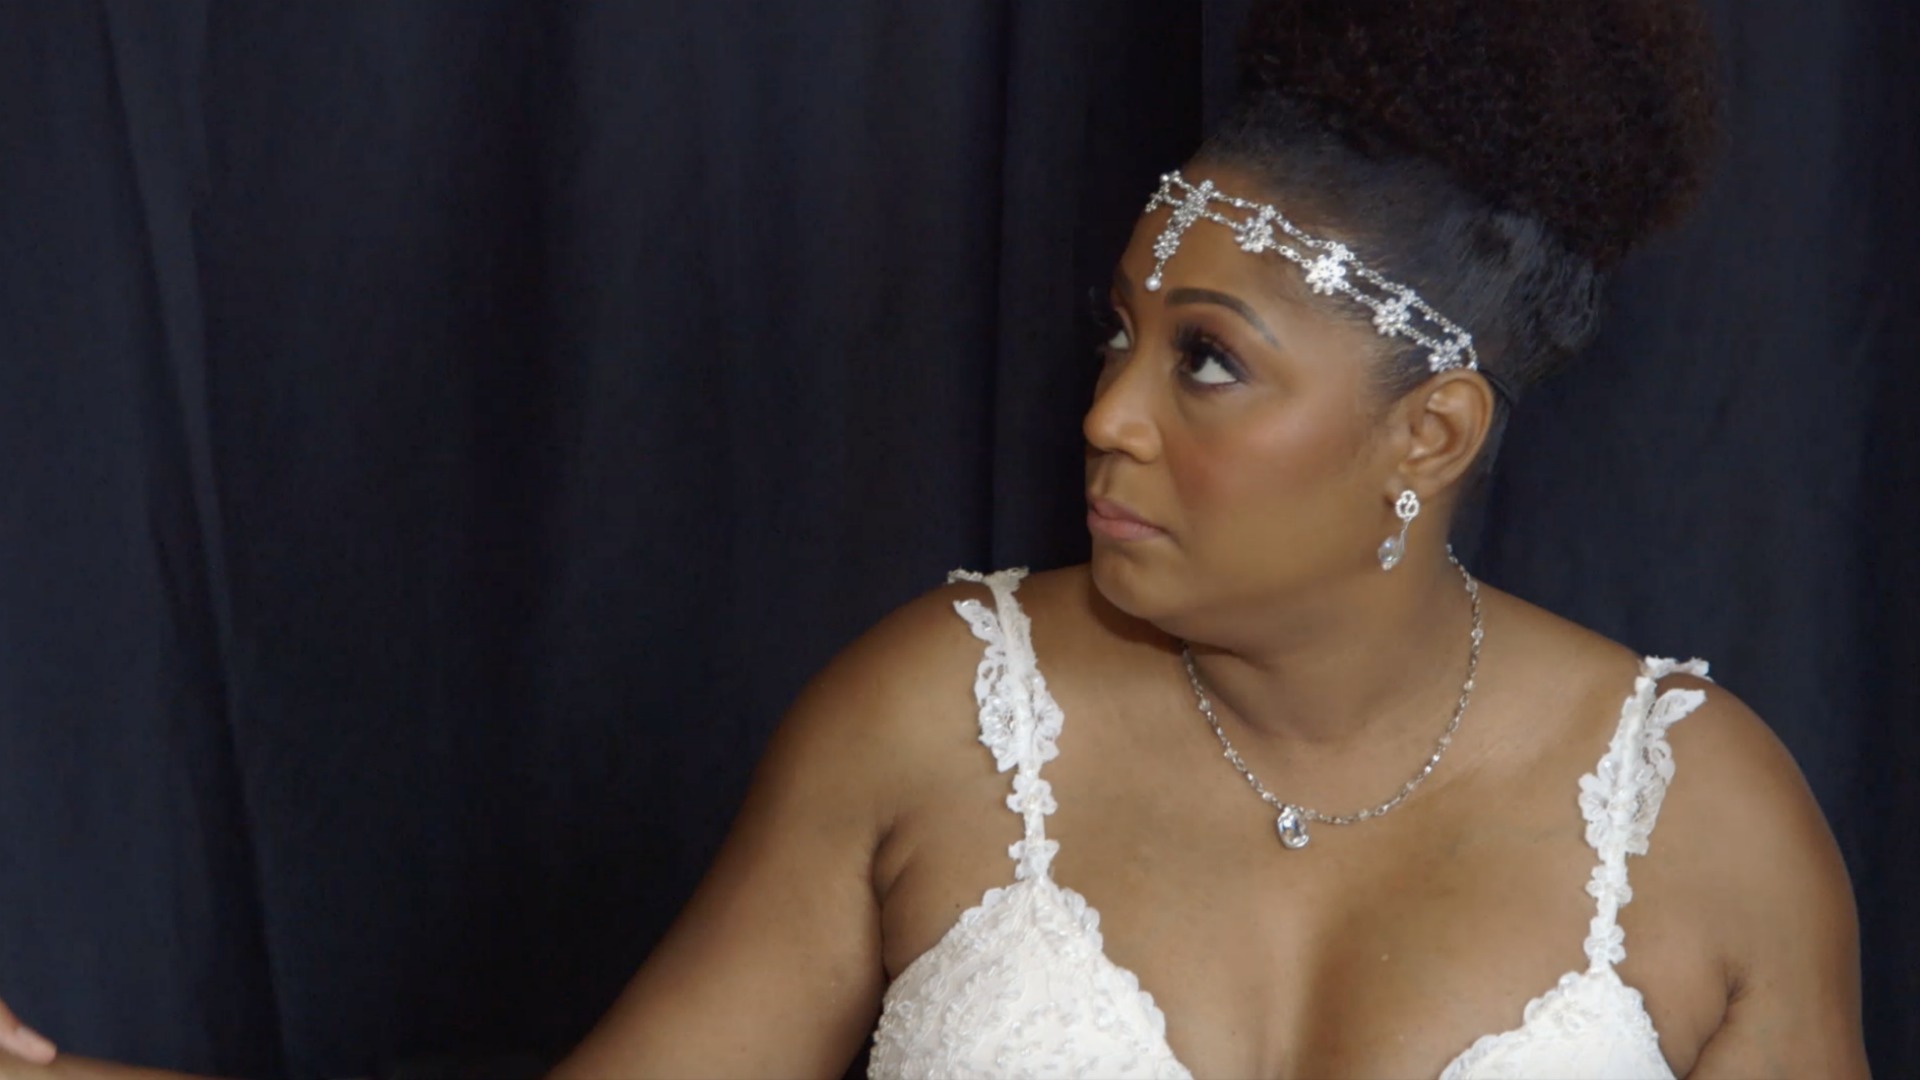 Watch Overheard: 'Maybe This Isn't My Perfect Wedding Day' | Braxton Family Values Video Extras